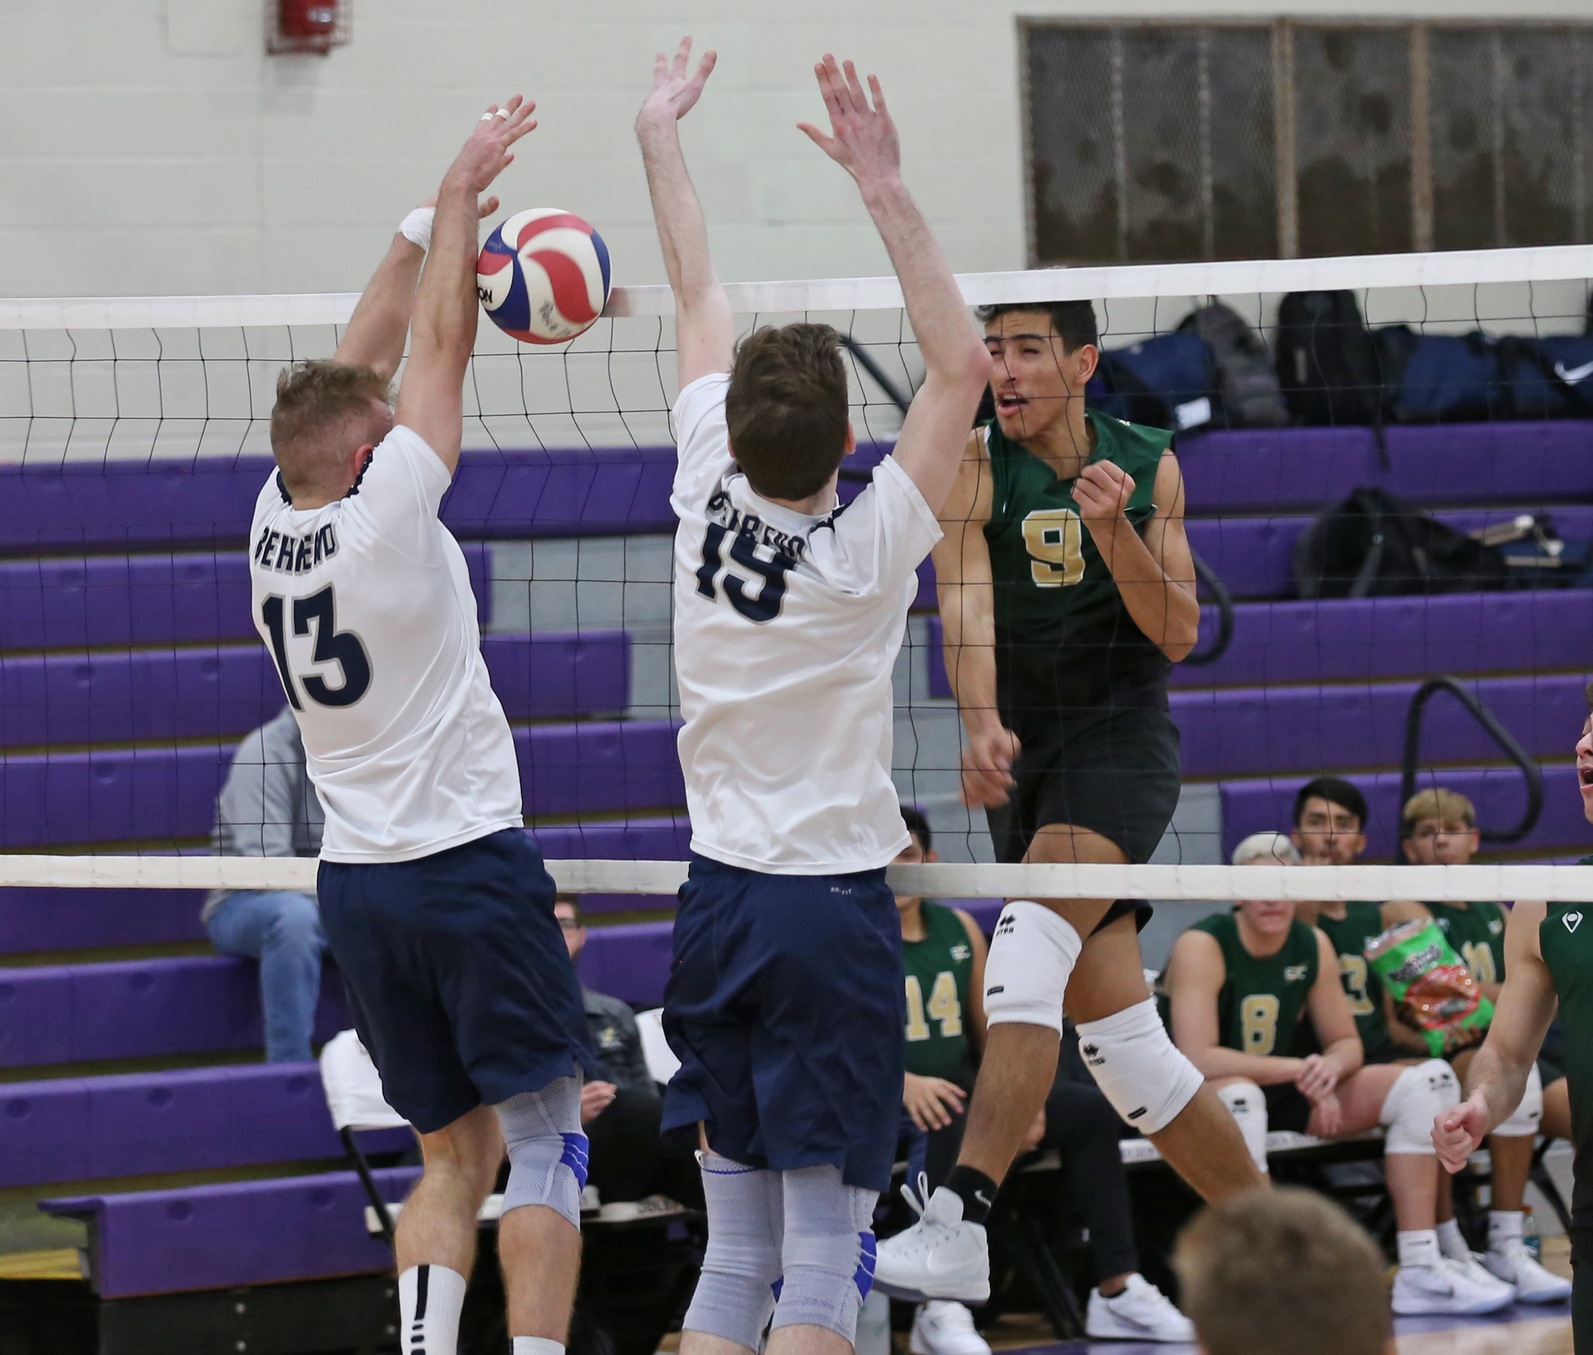 Men’s Volleyball Drops Road Match at Lasell